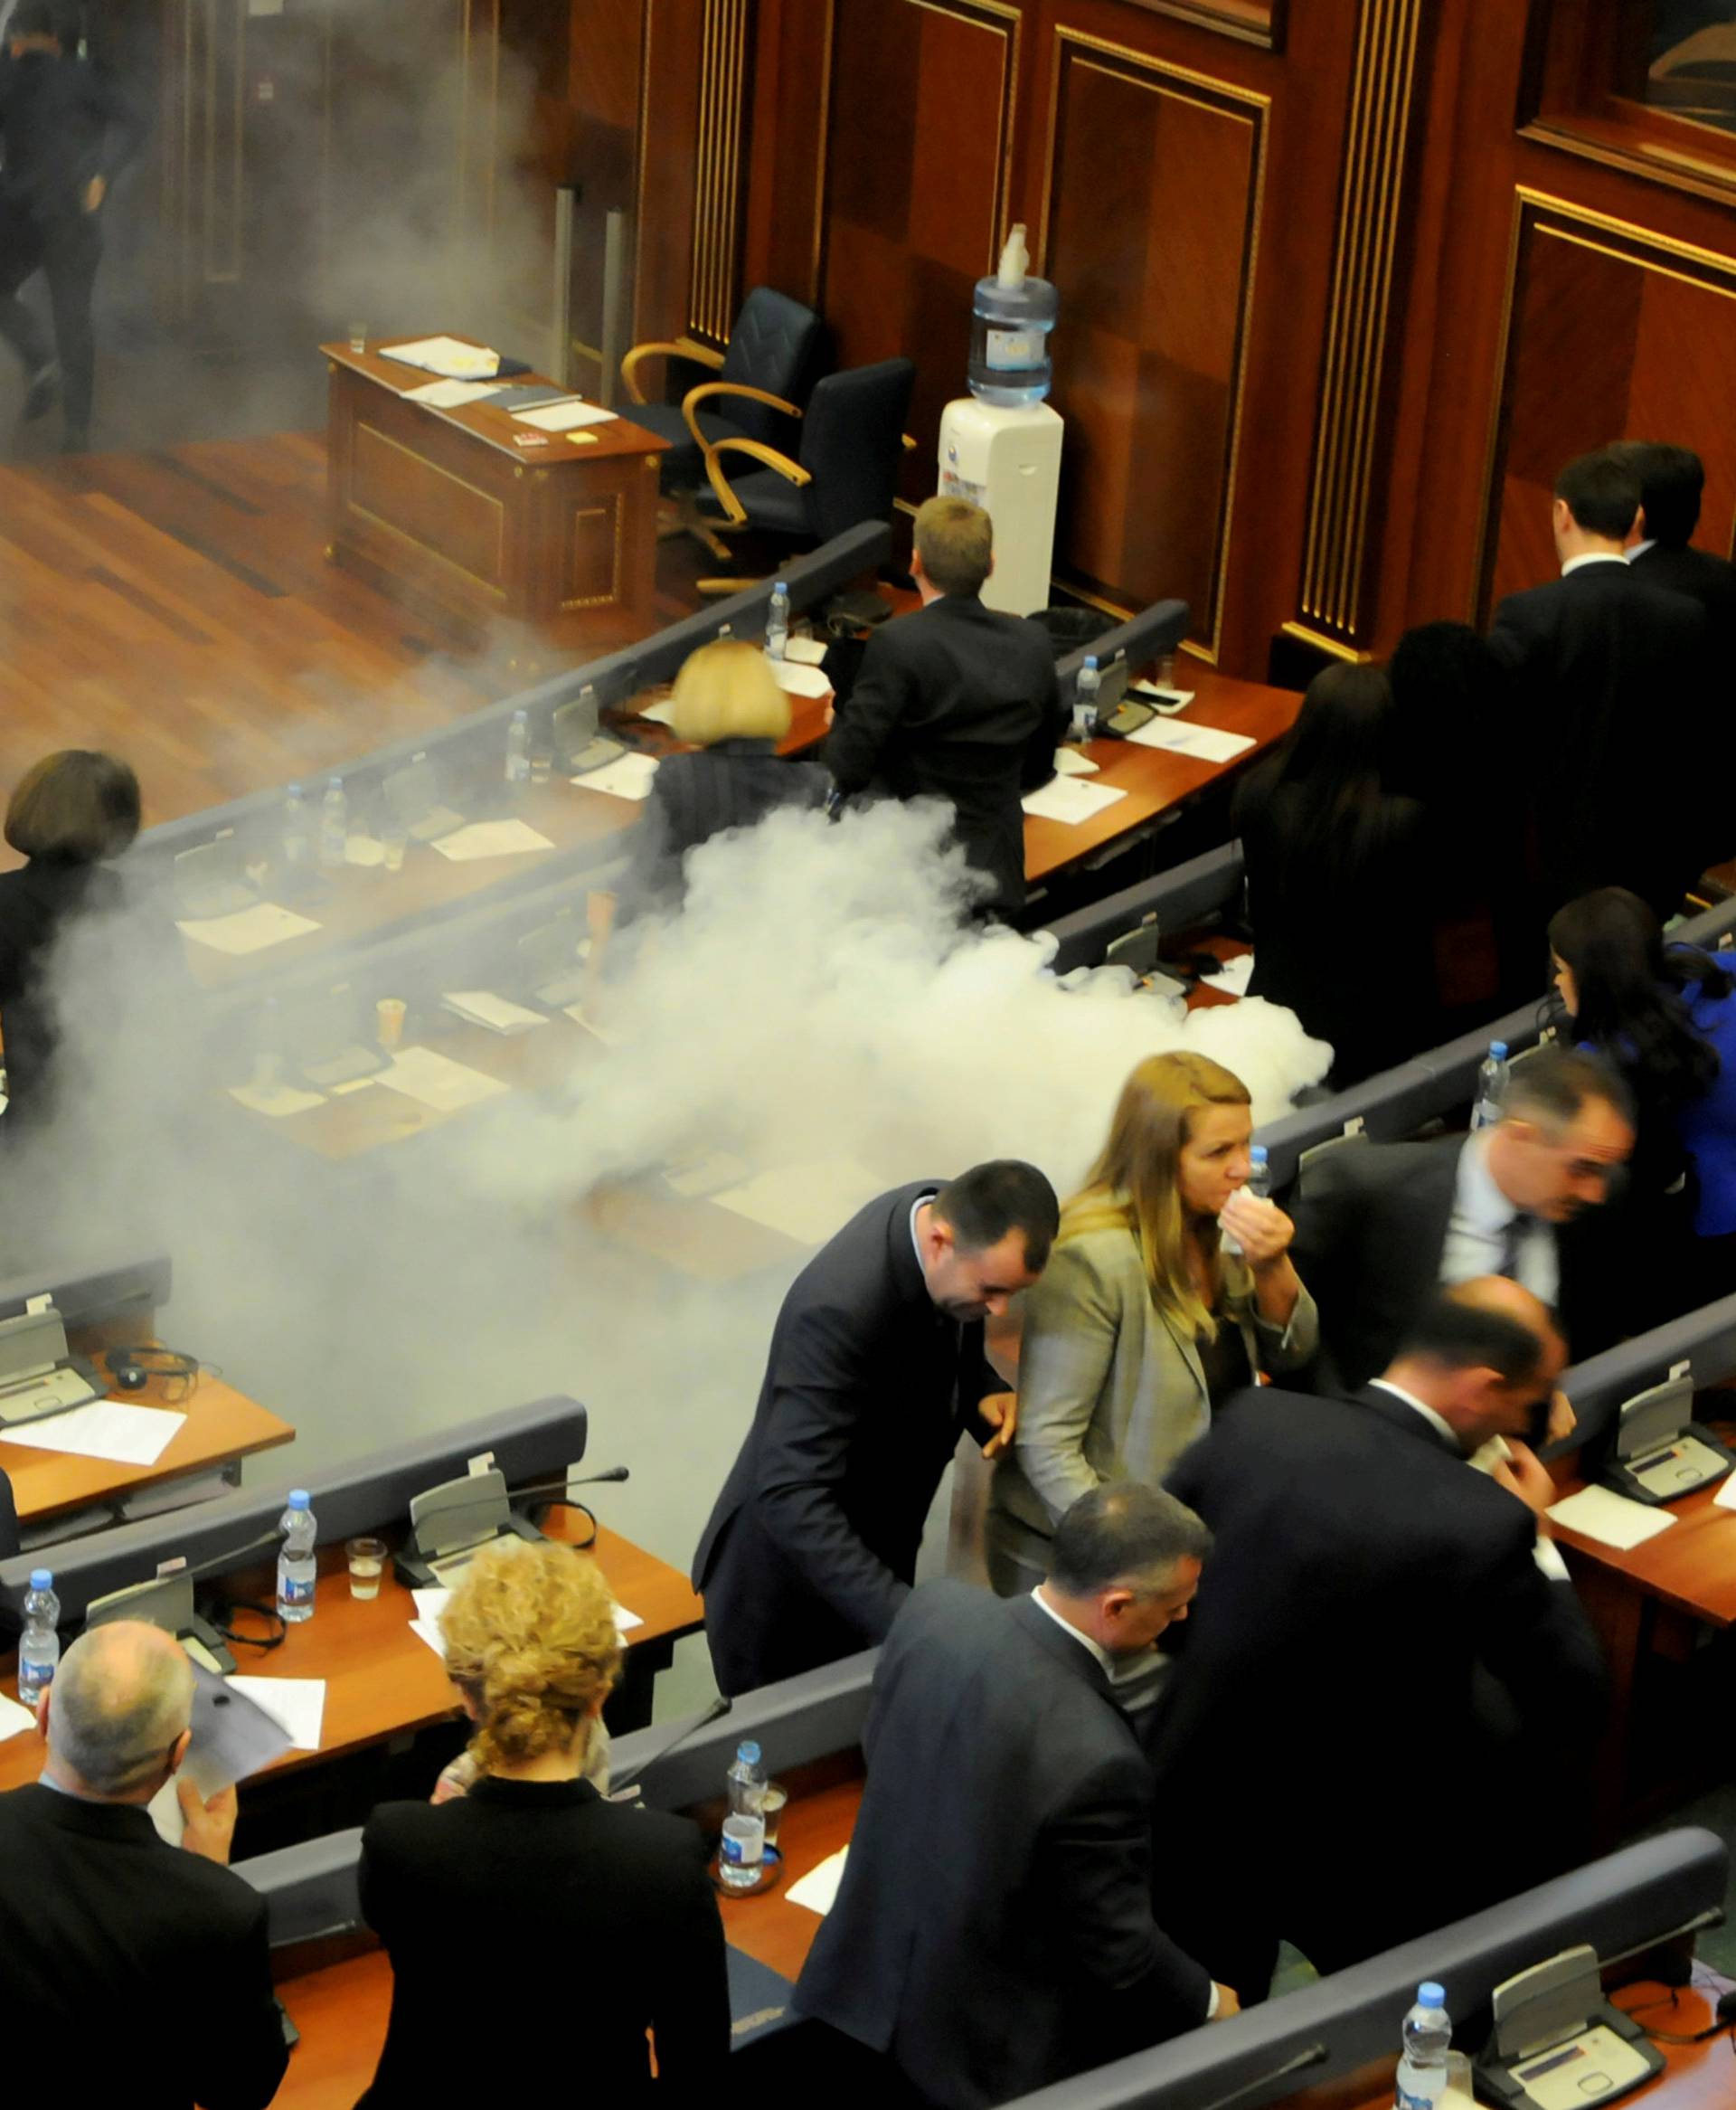 Kosovo opposition politicians release tear gas in parliament to obstruct a session in Pristina